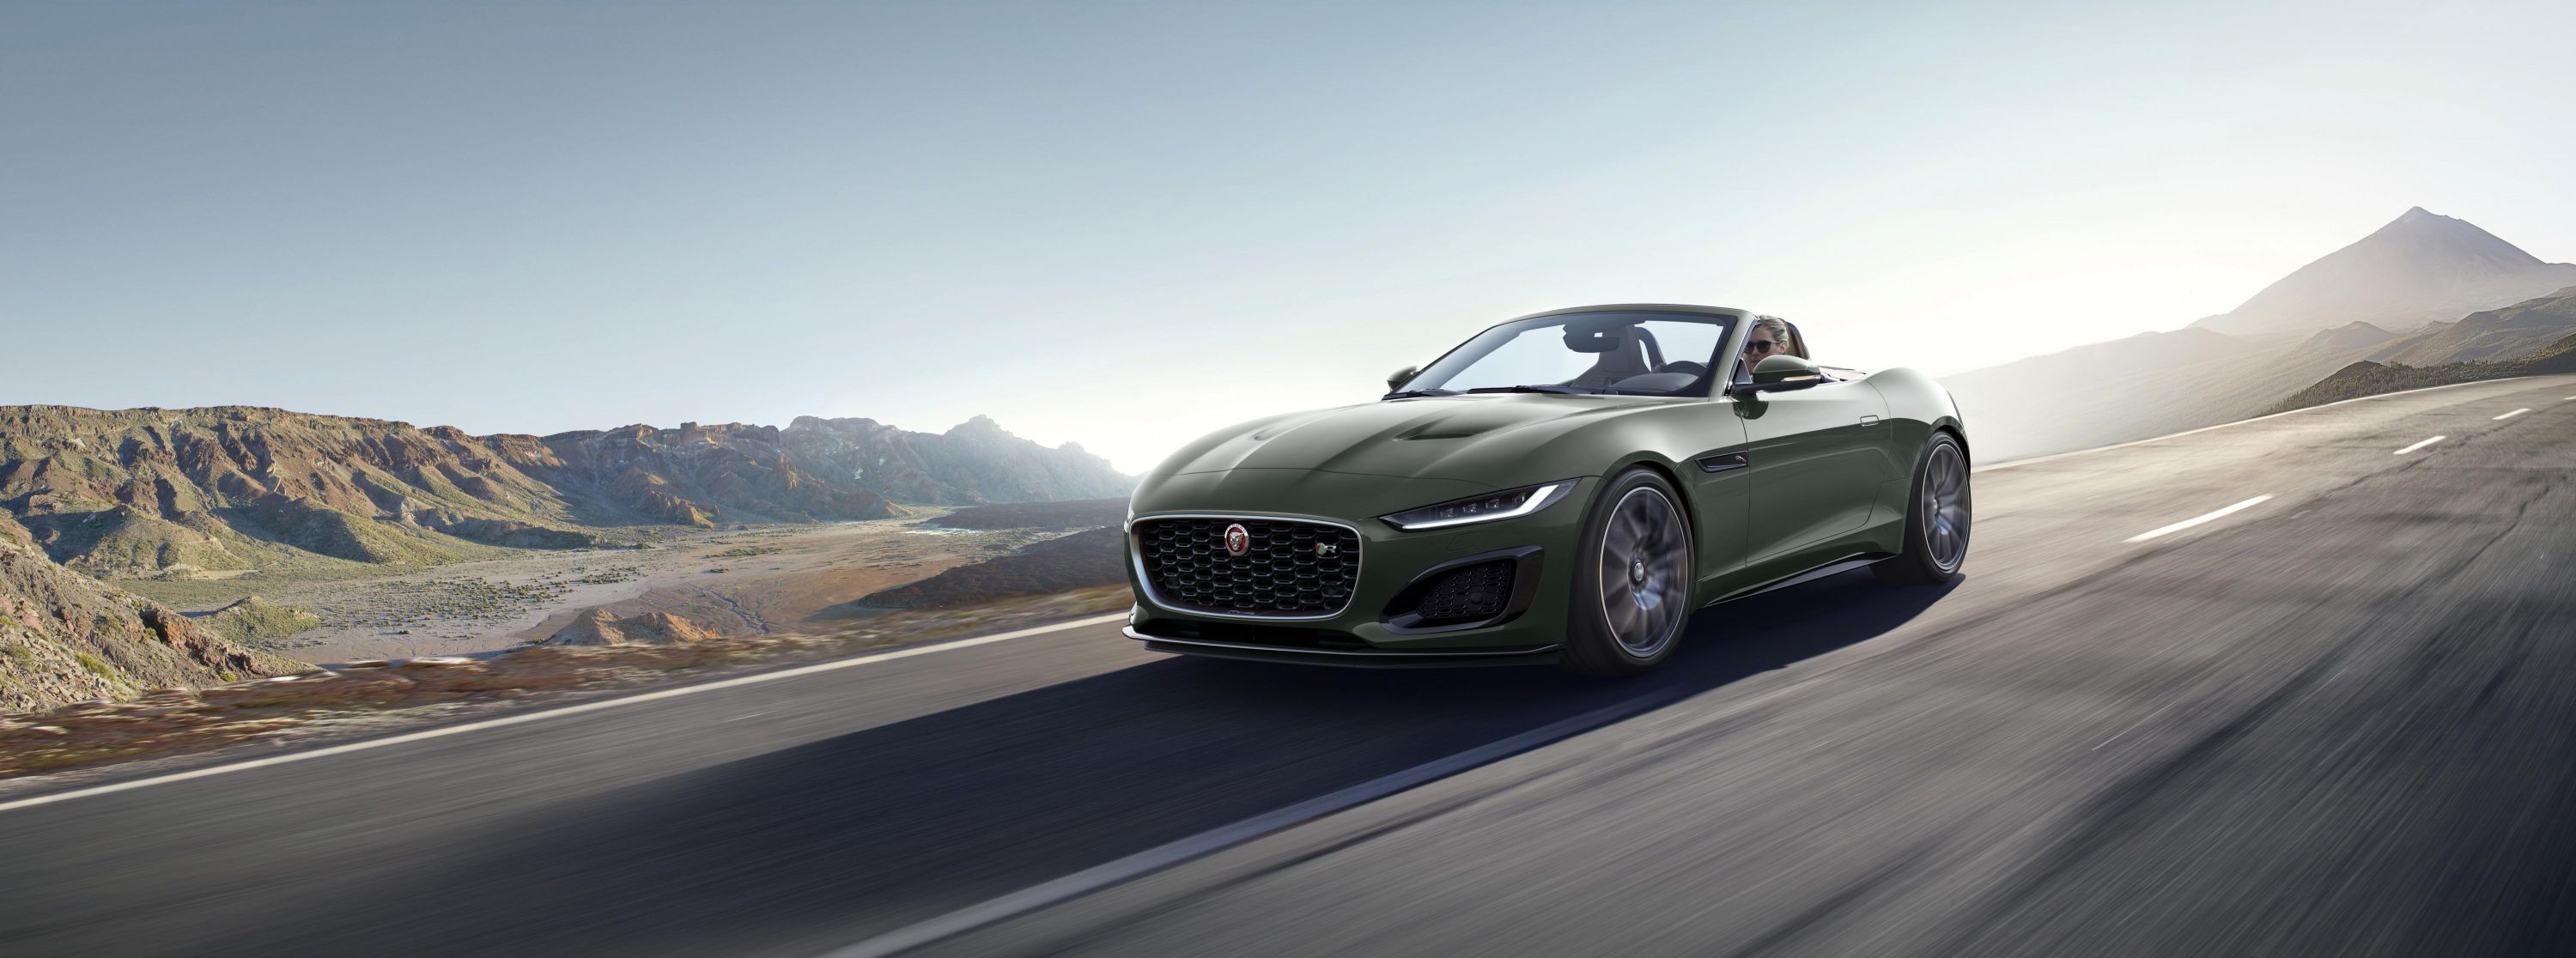 2021 Jaguar F-Type Heritage 60 Edition coming for E-Type's ...